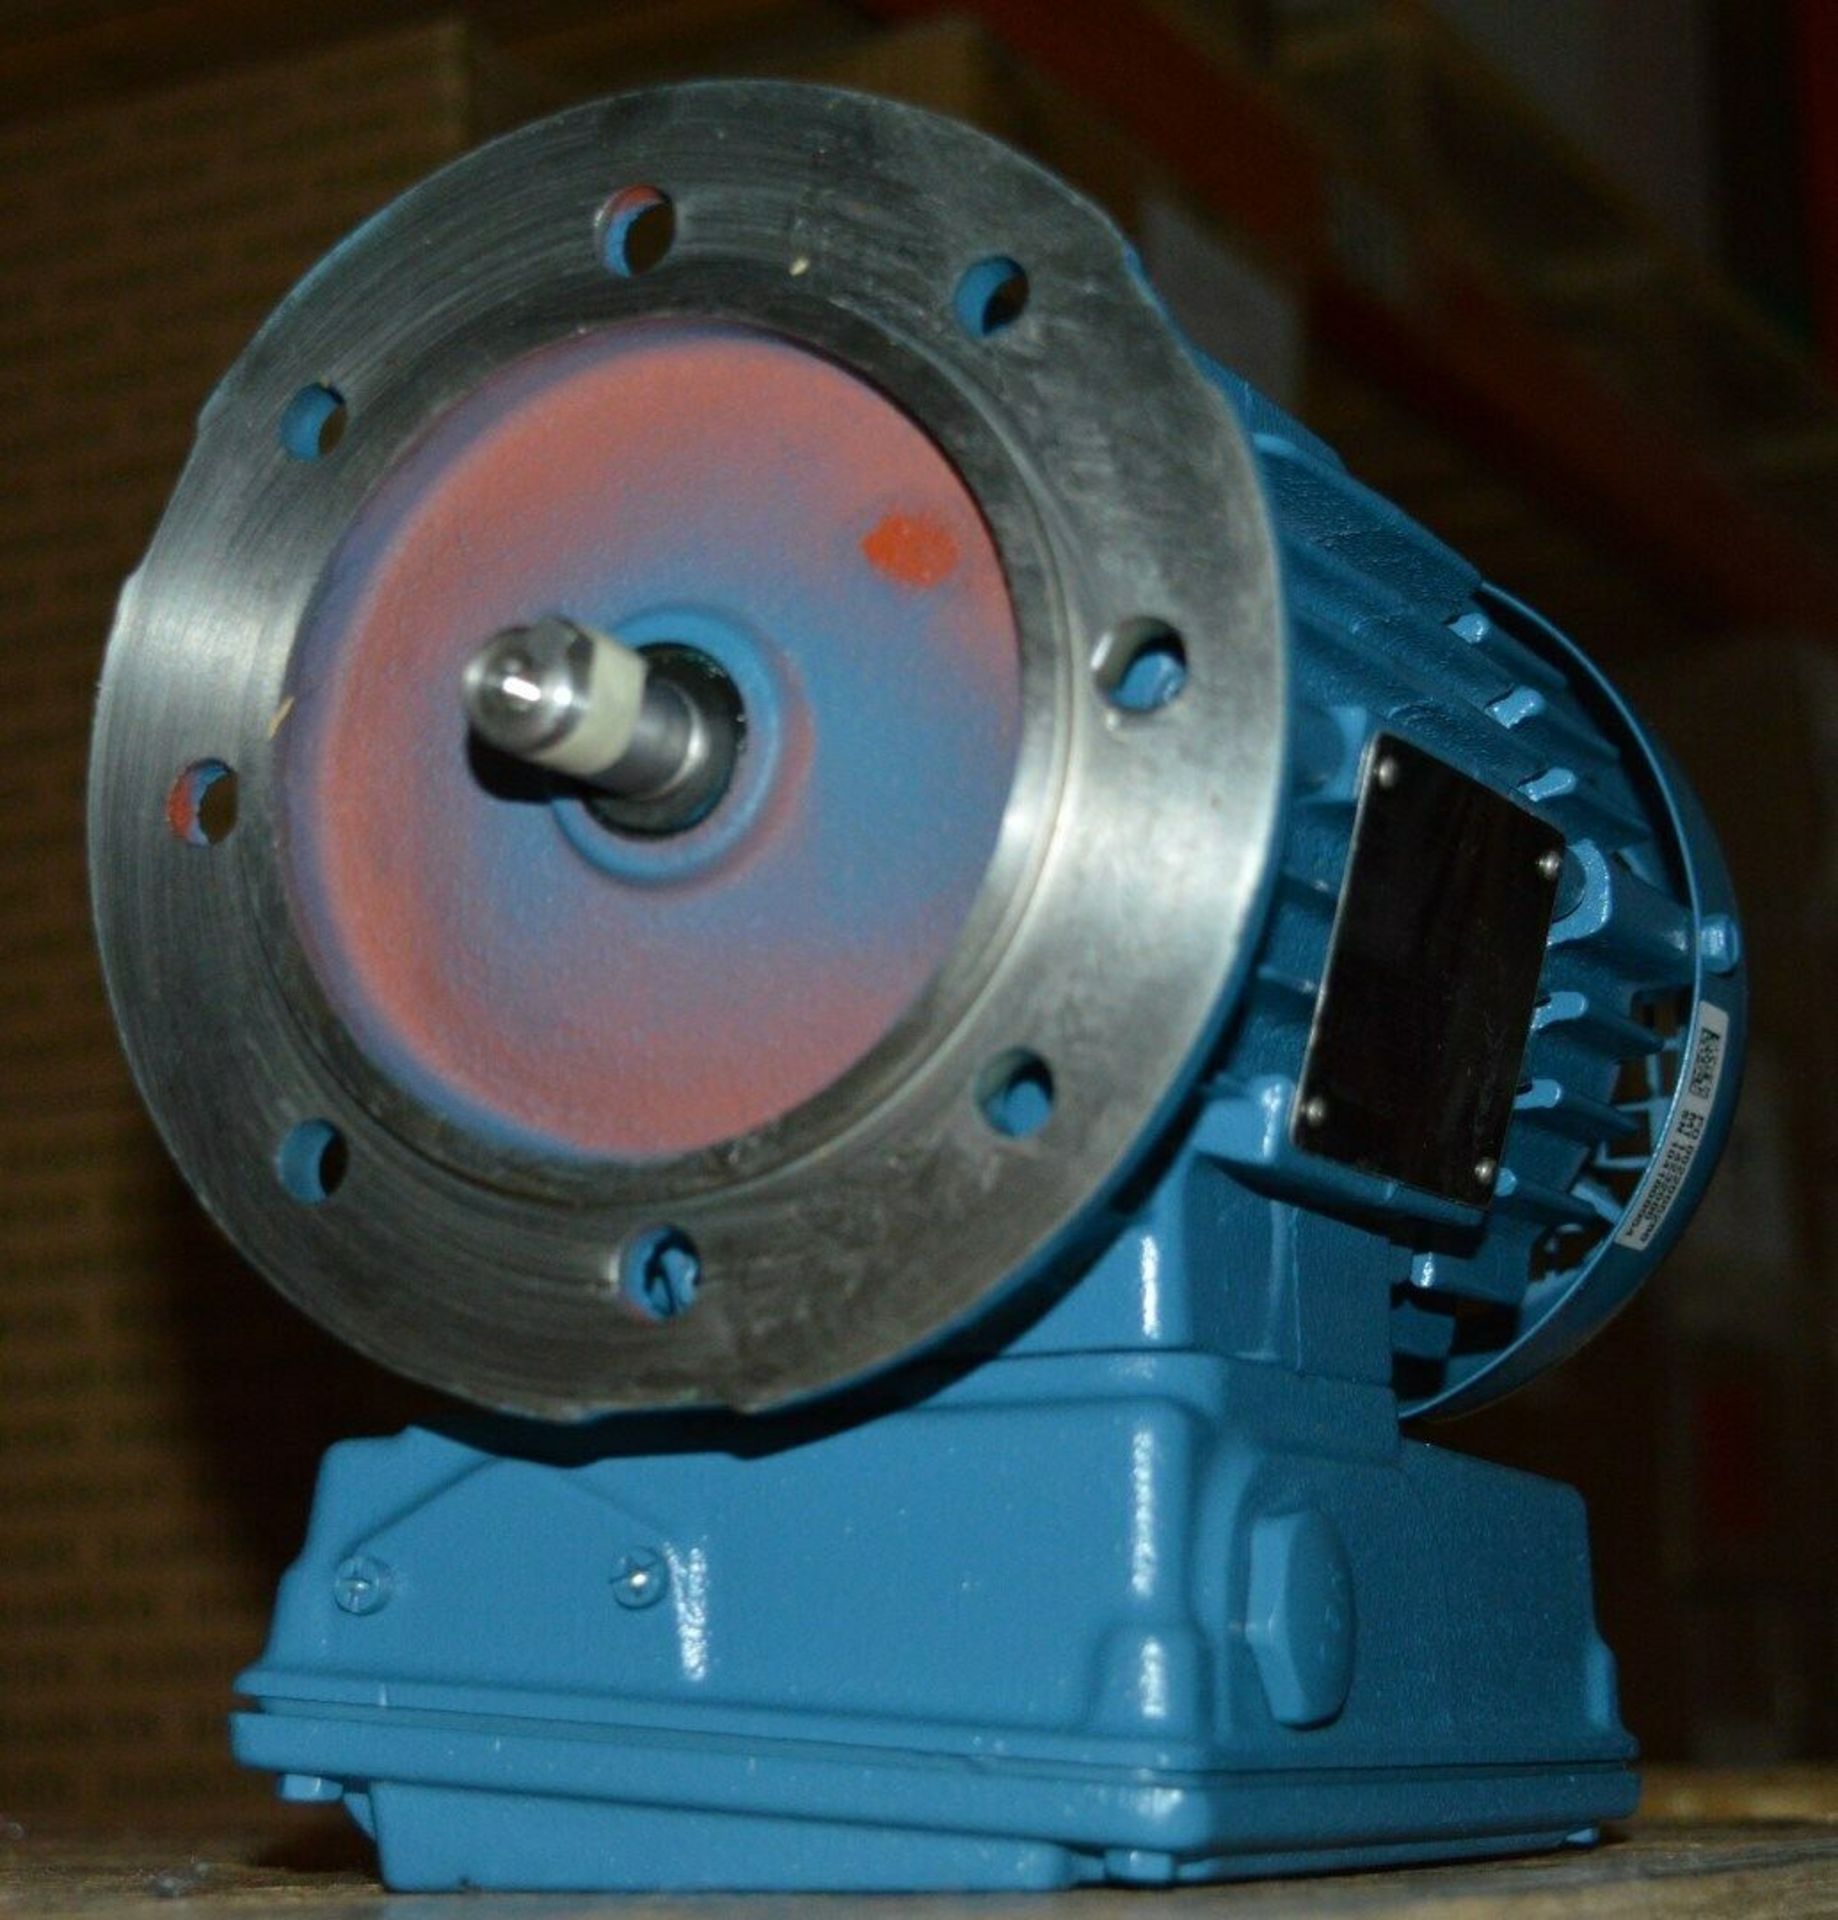 1 x Weg W22 110v IP55 Single Phase Electric Motor - Brand New and Boxed - CL295 - Location: - Image 3 of 7